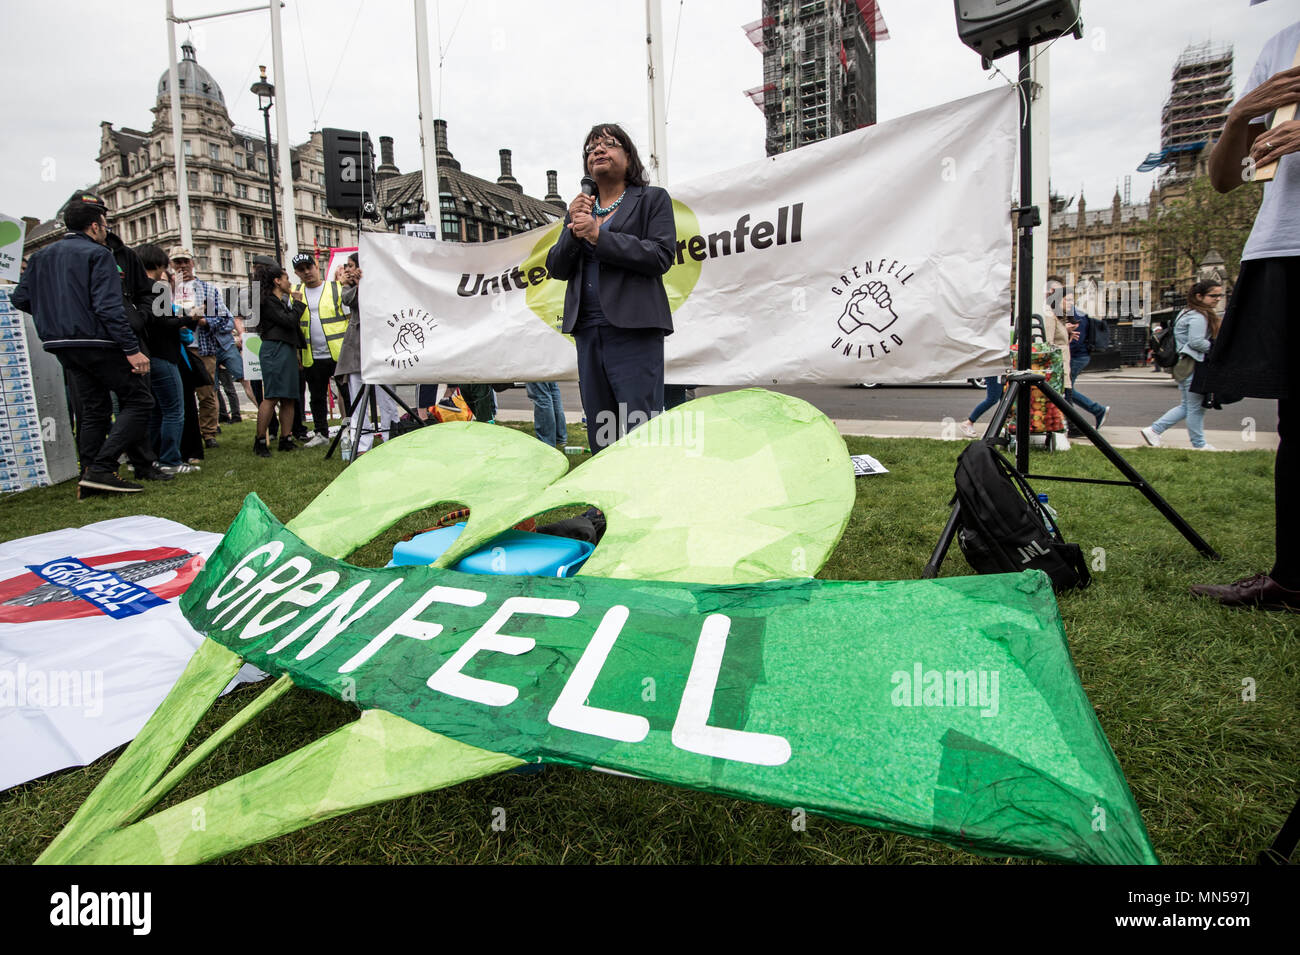 Diane Abbott speaking to protesters in front of the British Parliament. Protesters gathered in Parliament square in central London to demand justice for the victims of the Grenfell tower fire last year. Stock Photo